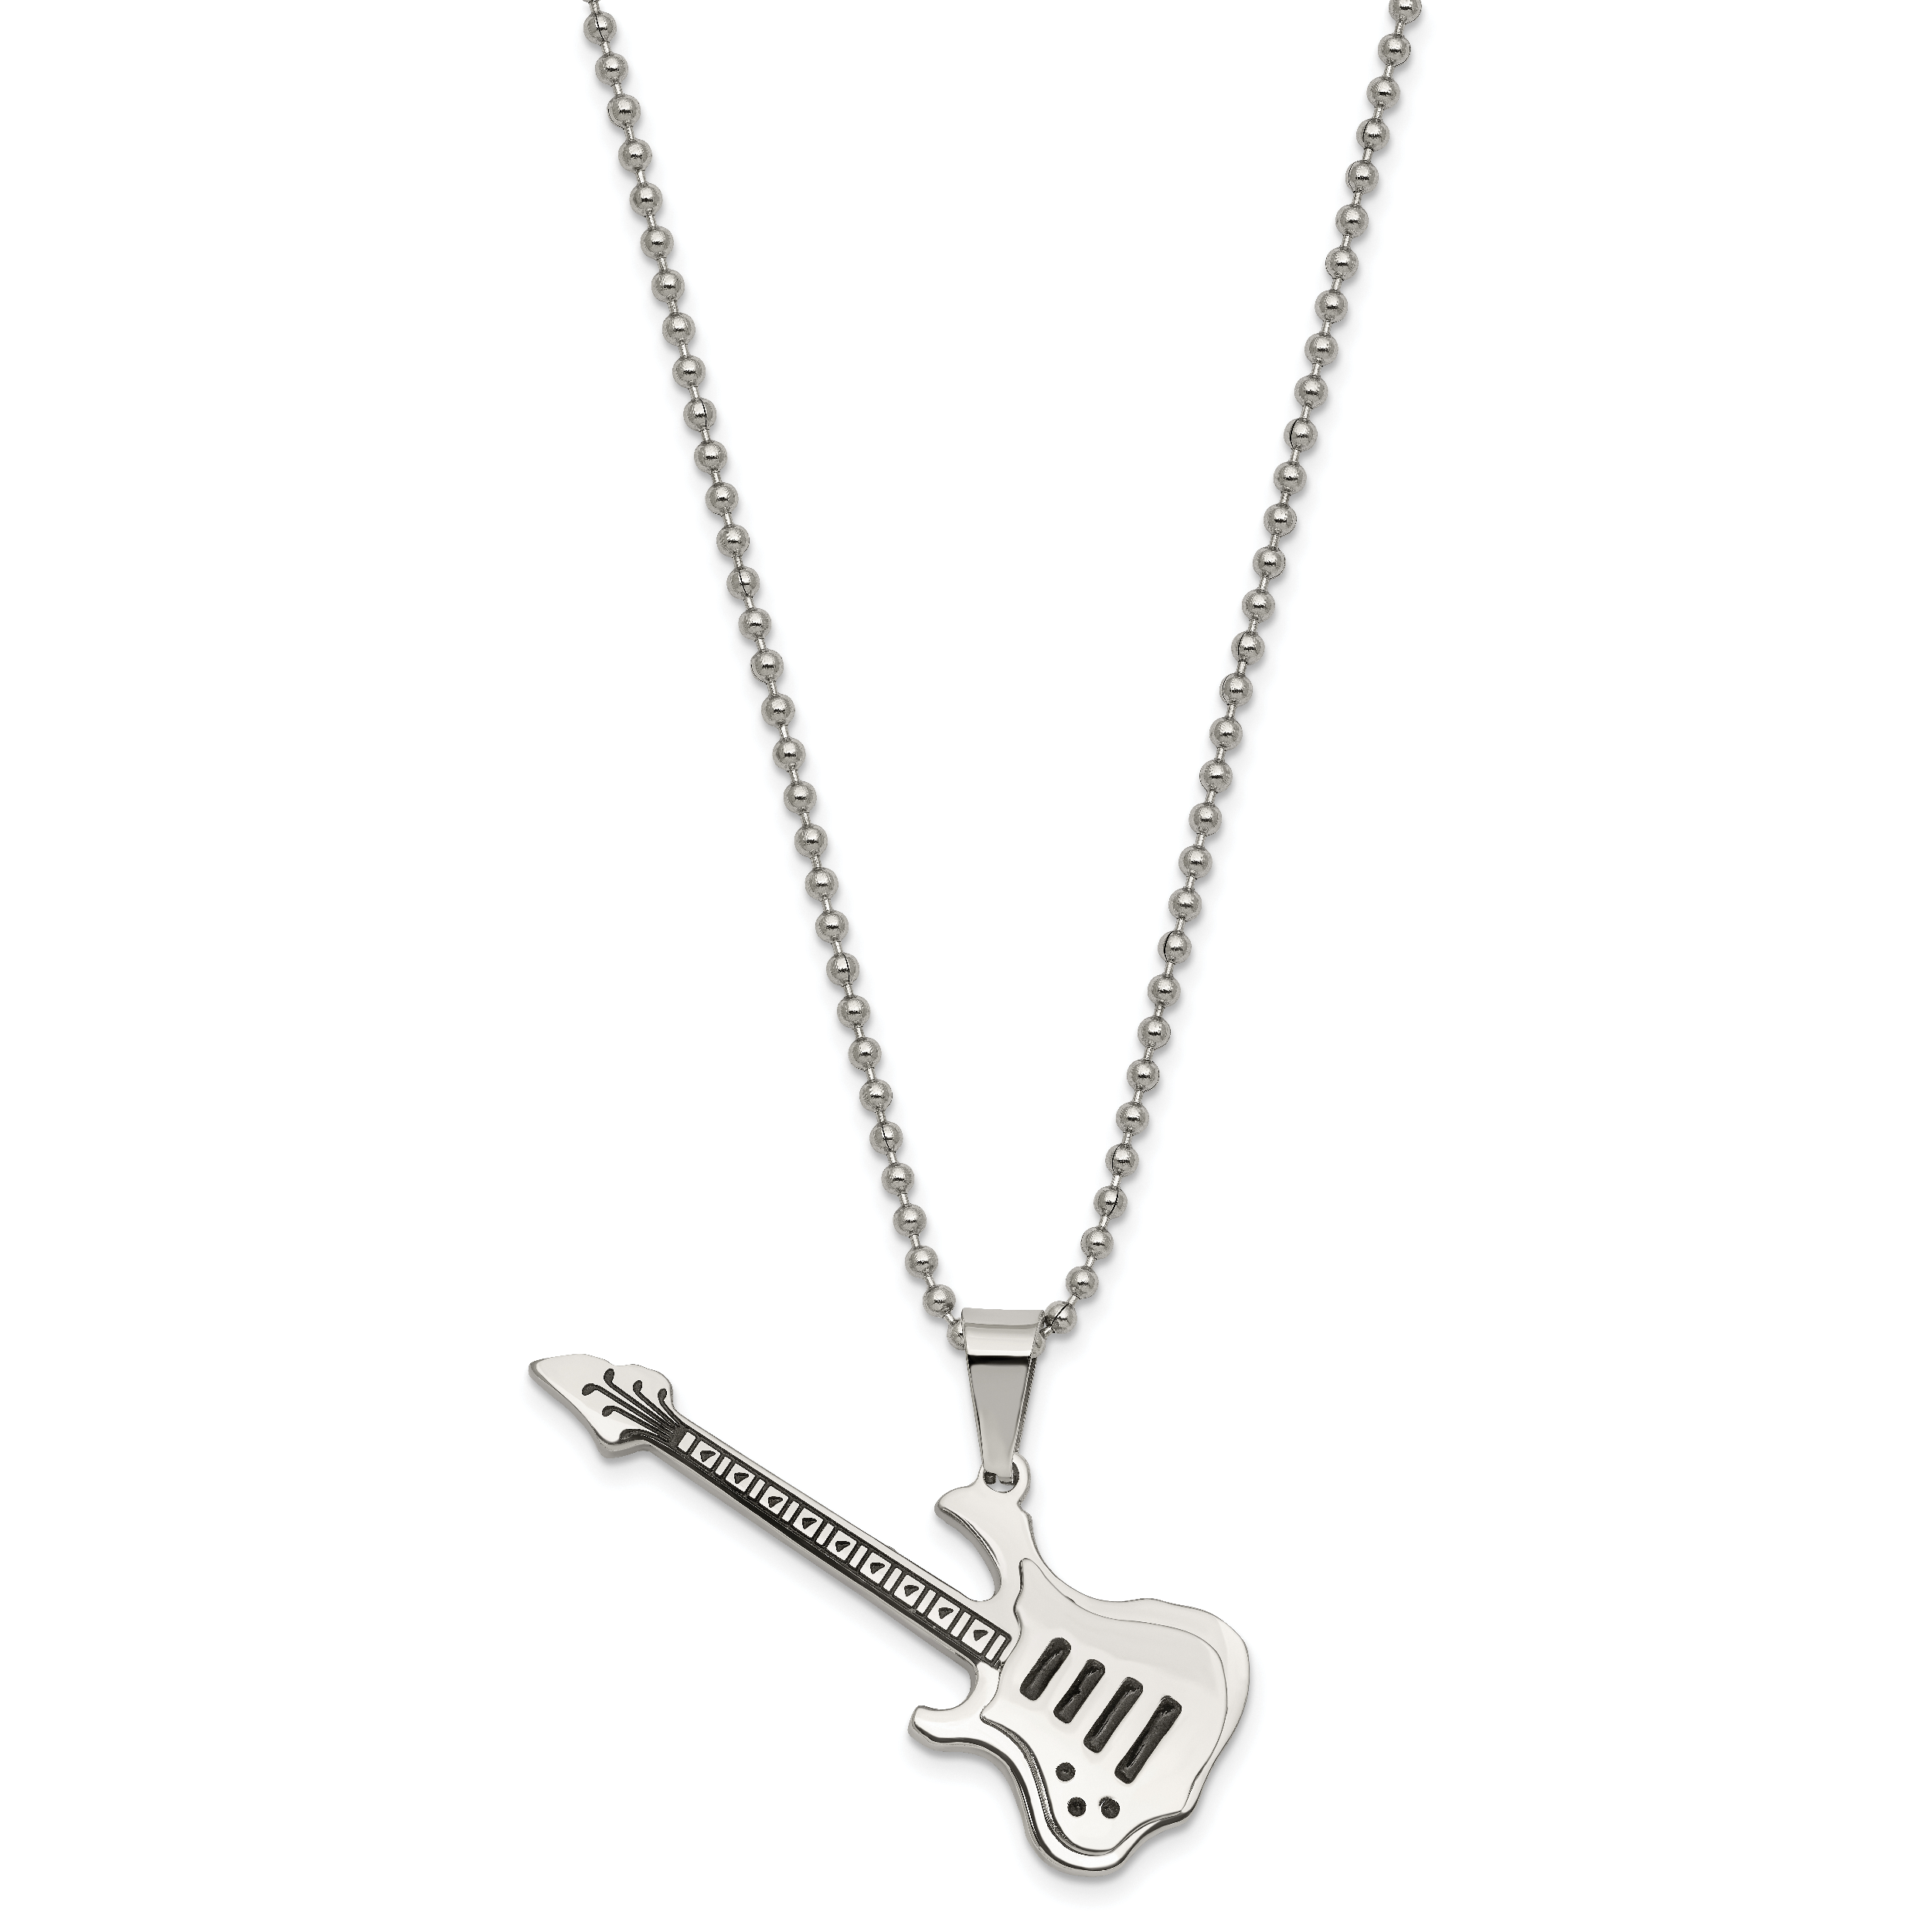 Buy Simulated Pearl, White Austrian Crystal, Enameled Guitar Pendant  Necklace 28 Inches in Rosetone & Iron at ShopLC.